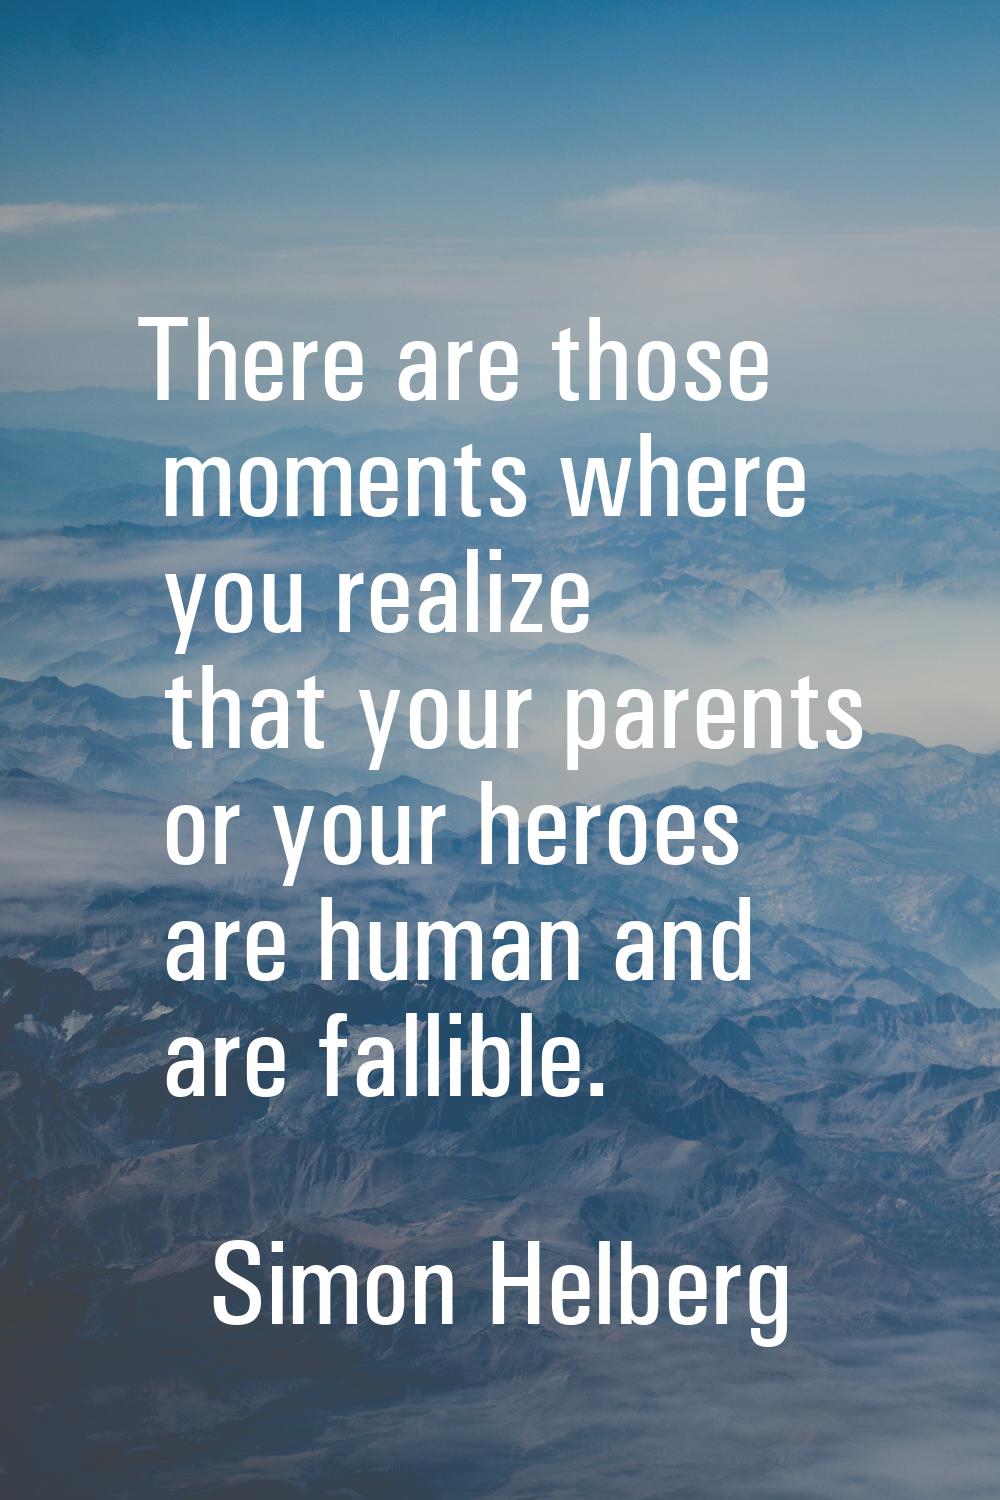 There are those moments where you realize that your parents or your heroes are human and are fallib